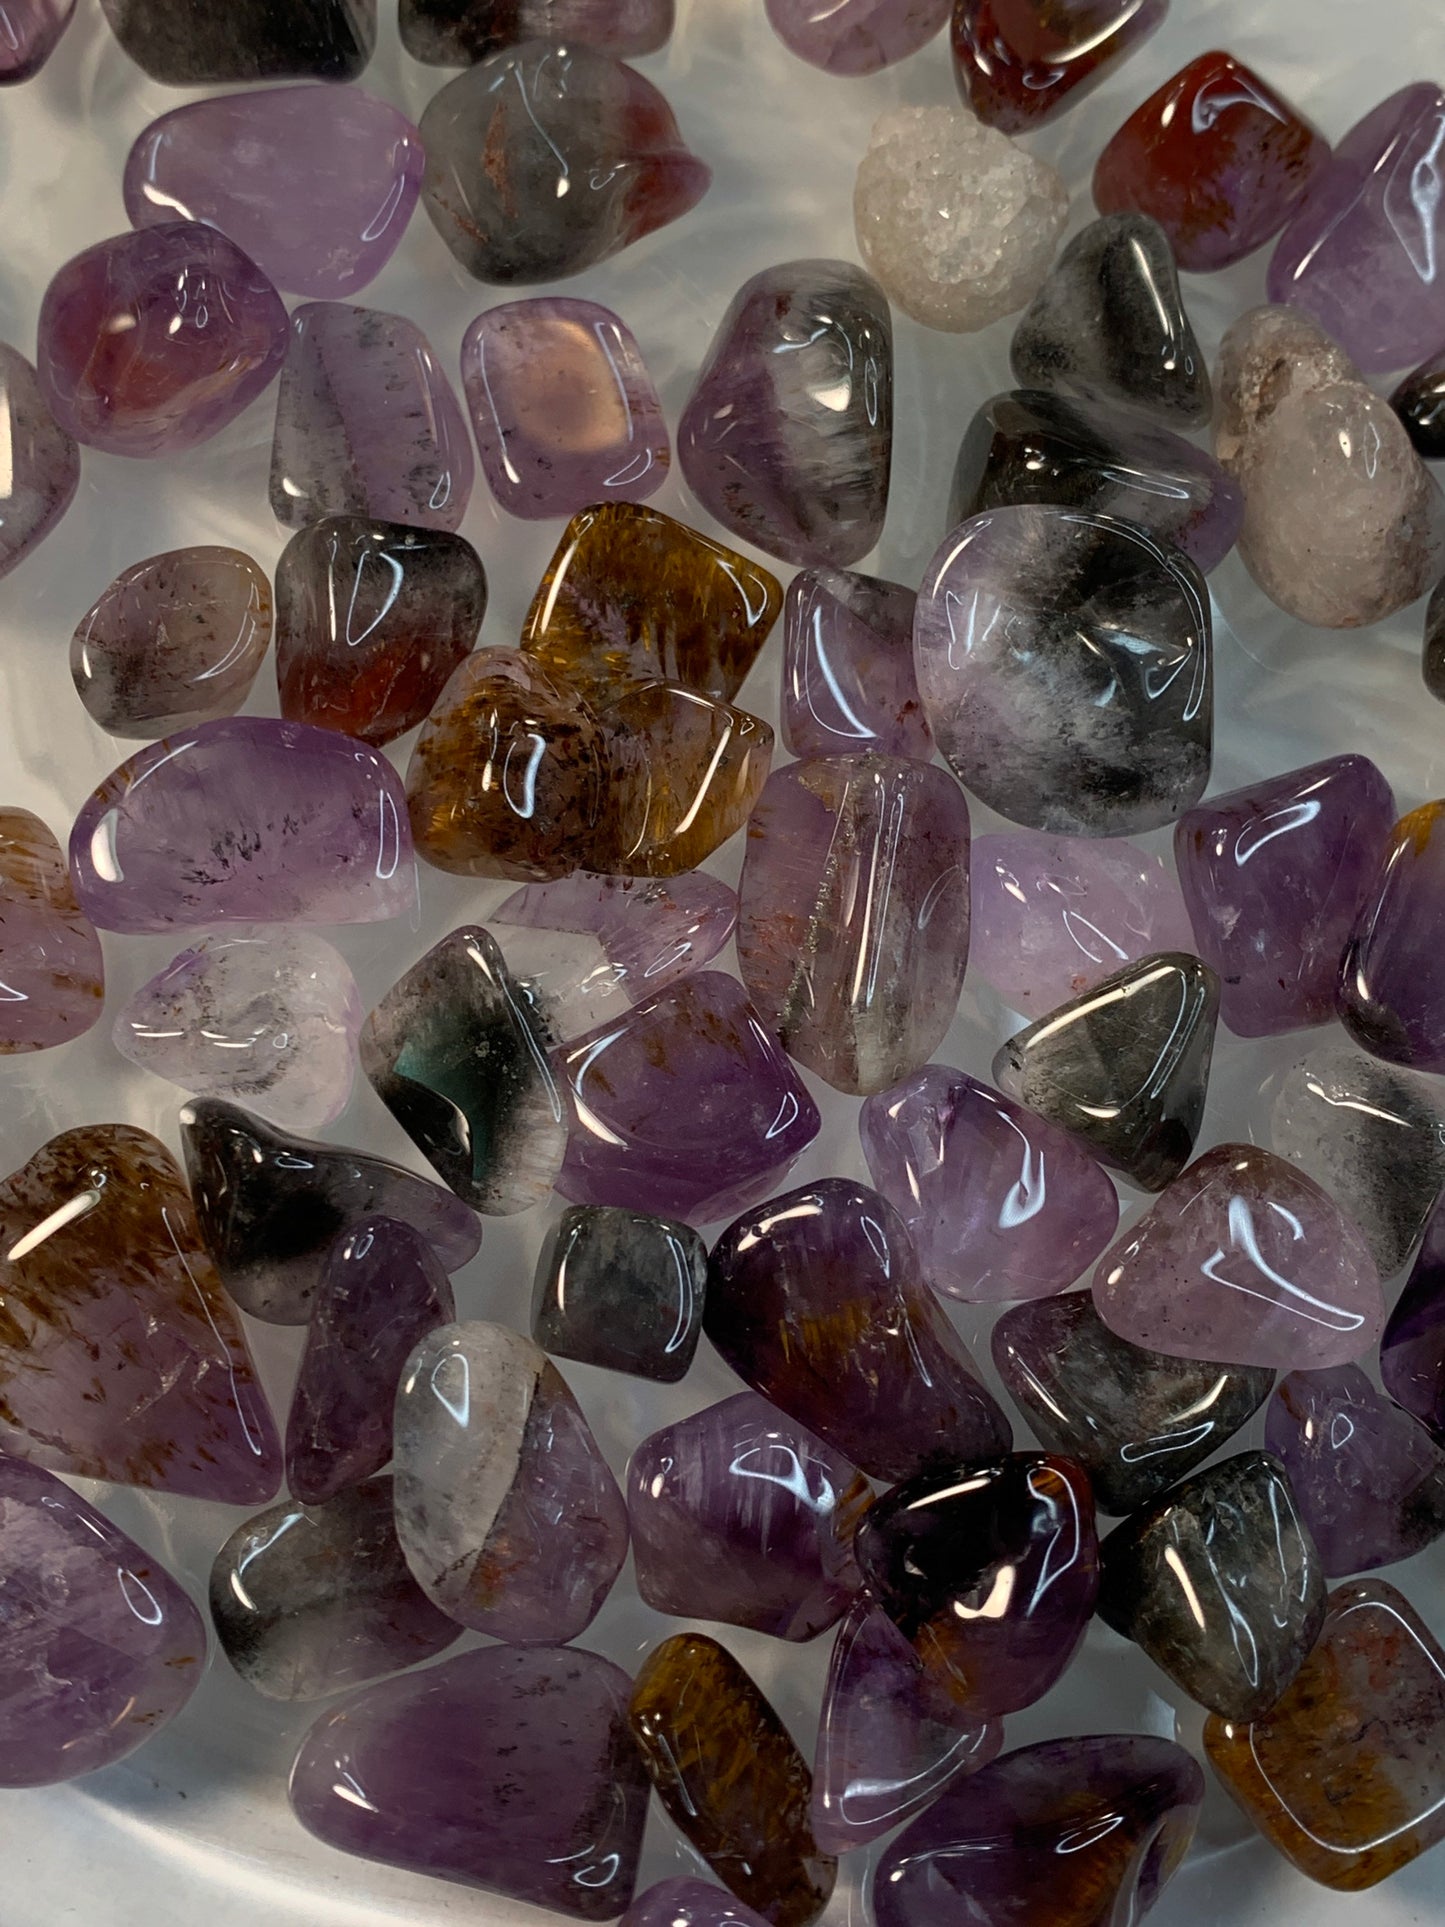 Super 7 stone, Polished, Master Healing Stone, Very Small (1/2" - 3/4") 0638